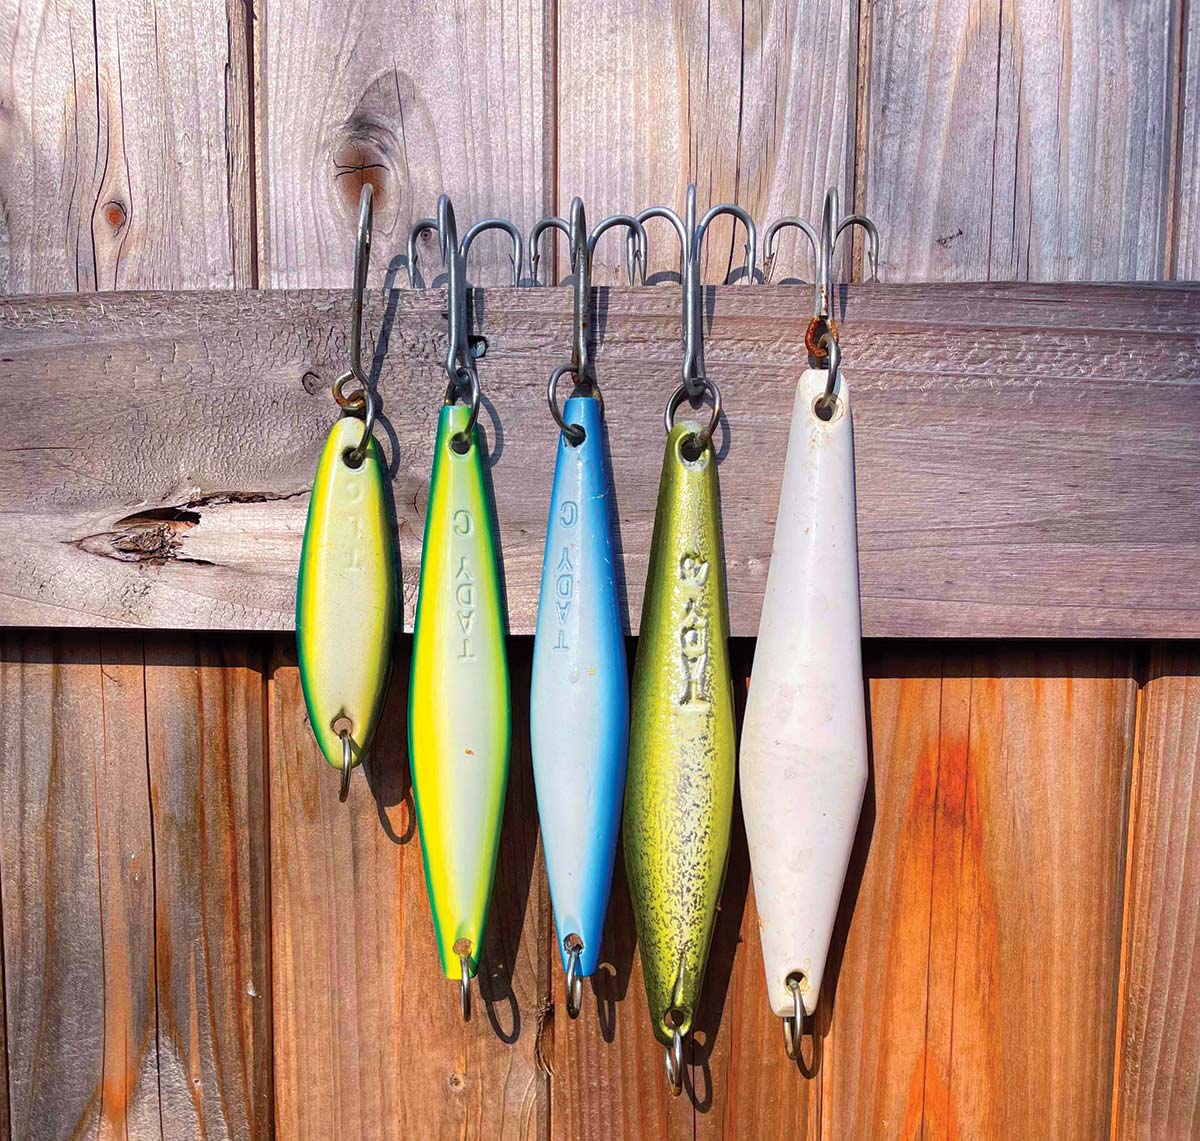 7 inch by 3oz Flutter Spoons for Homemade Fishing Lures